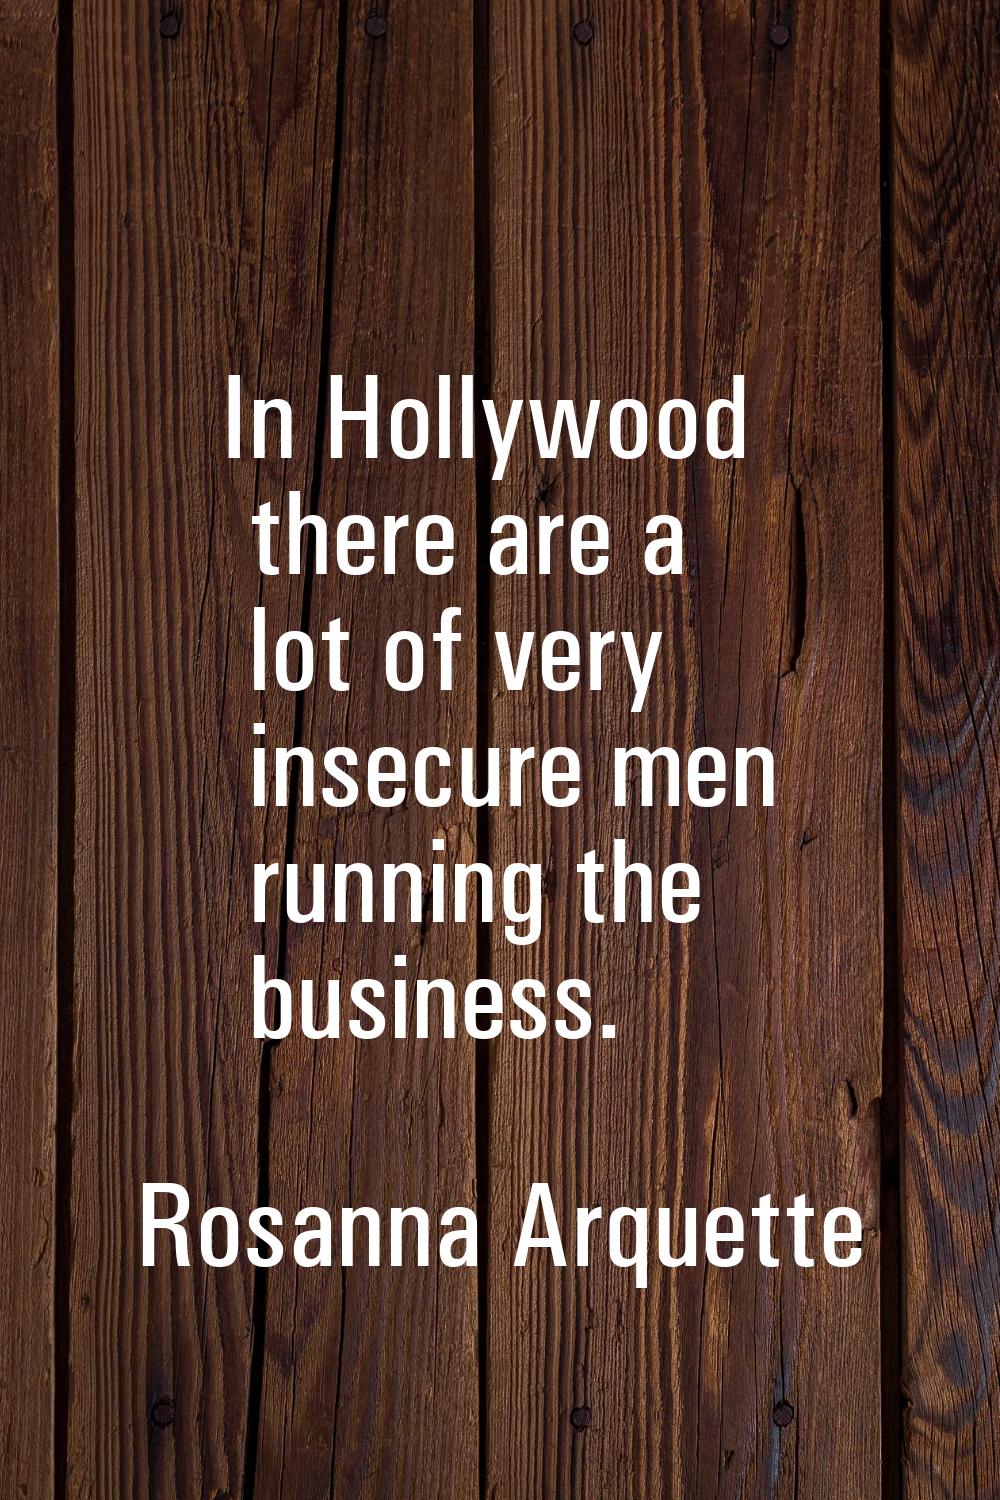 In Hollywood there are a lot of very insecure men running the business.